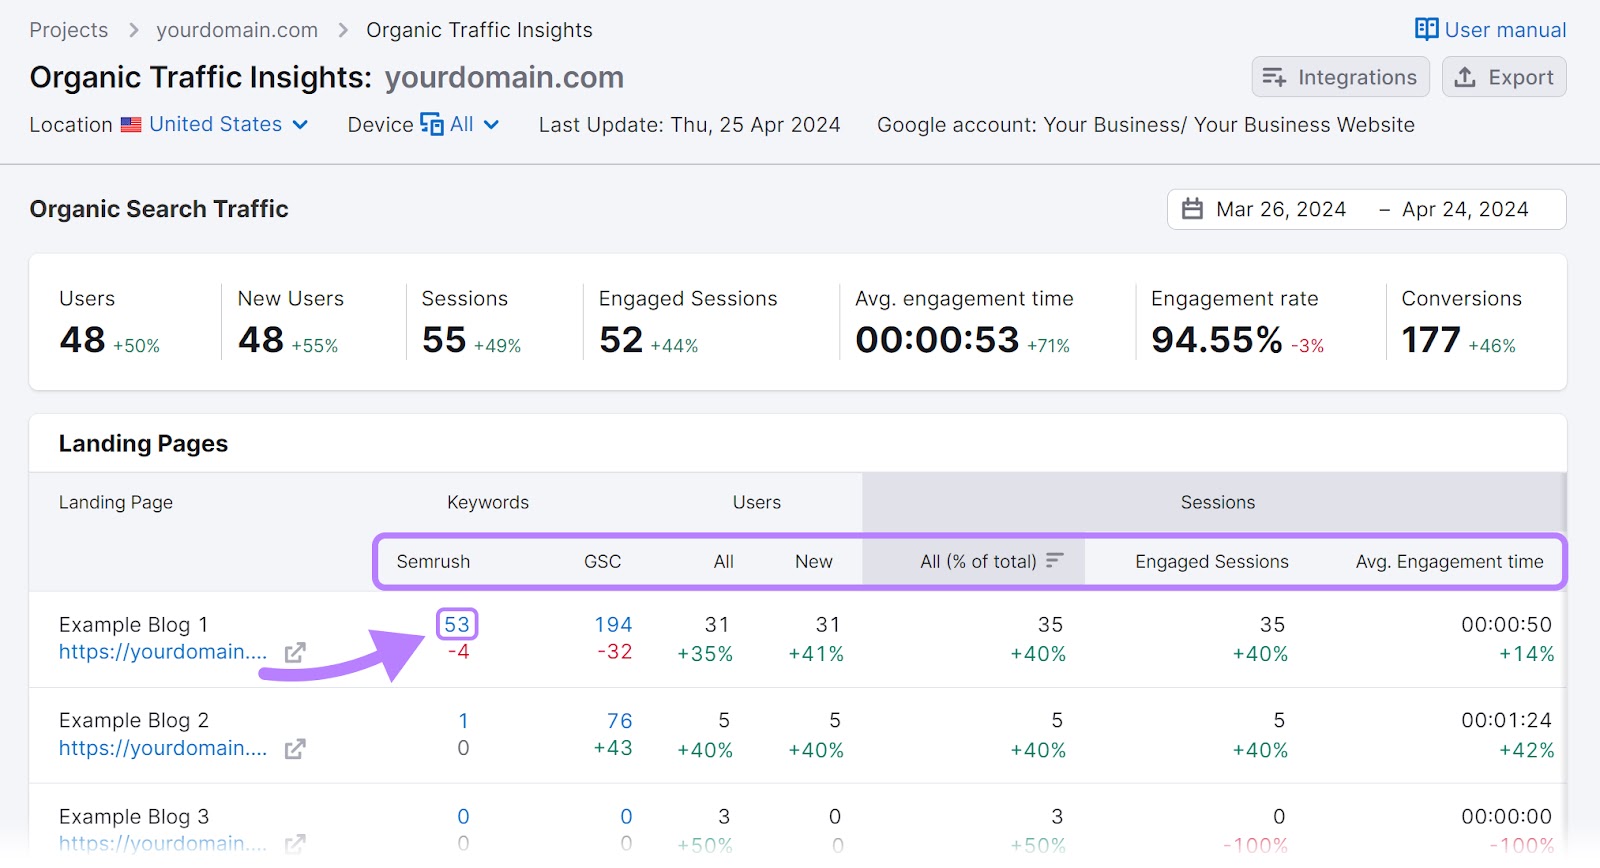 Organic Traffic Insights dashboard with the blue number in the "Semrush" column highlighted.